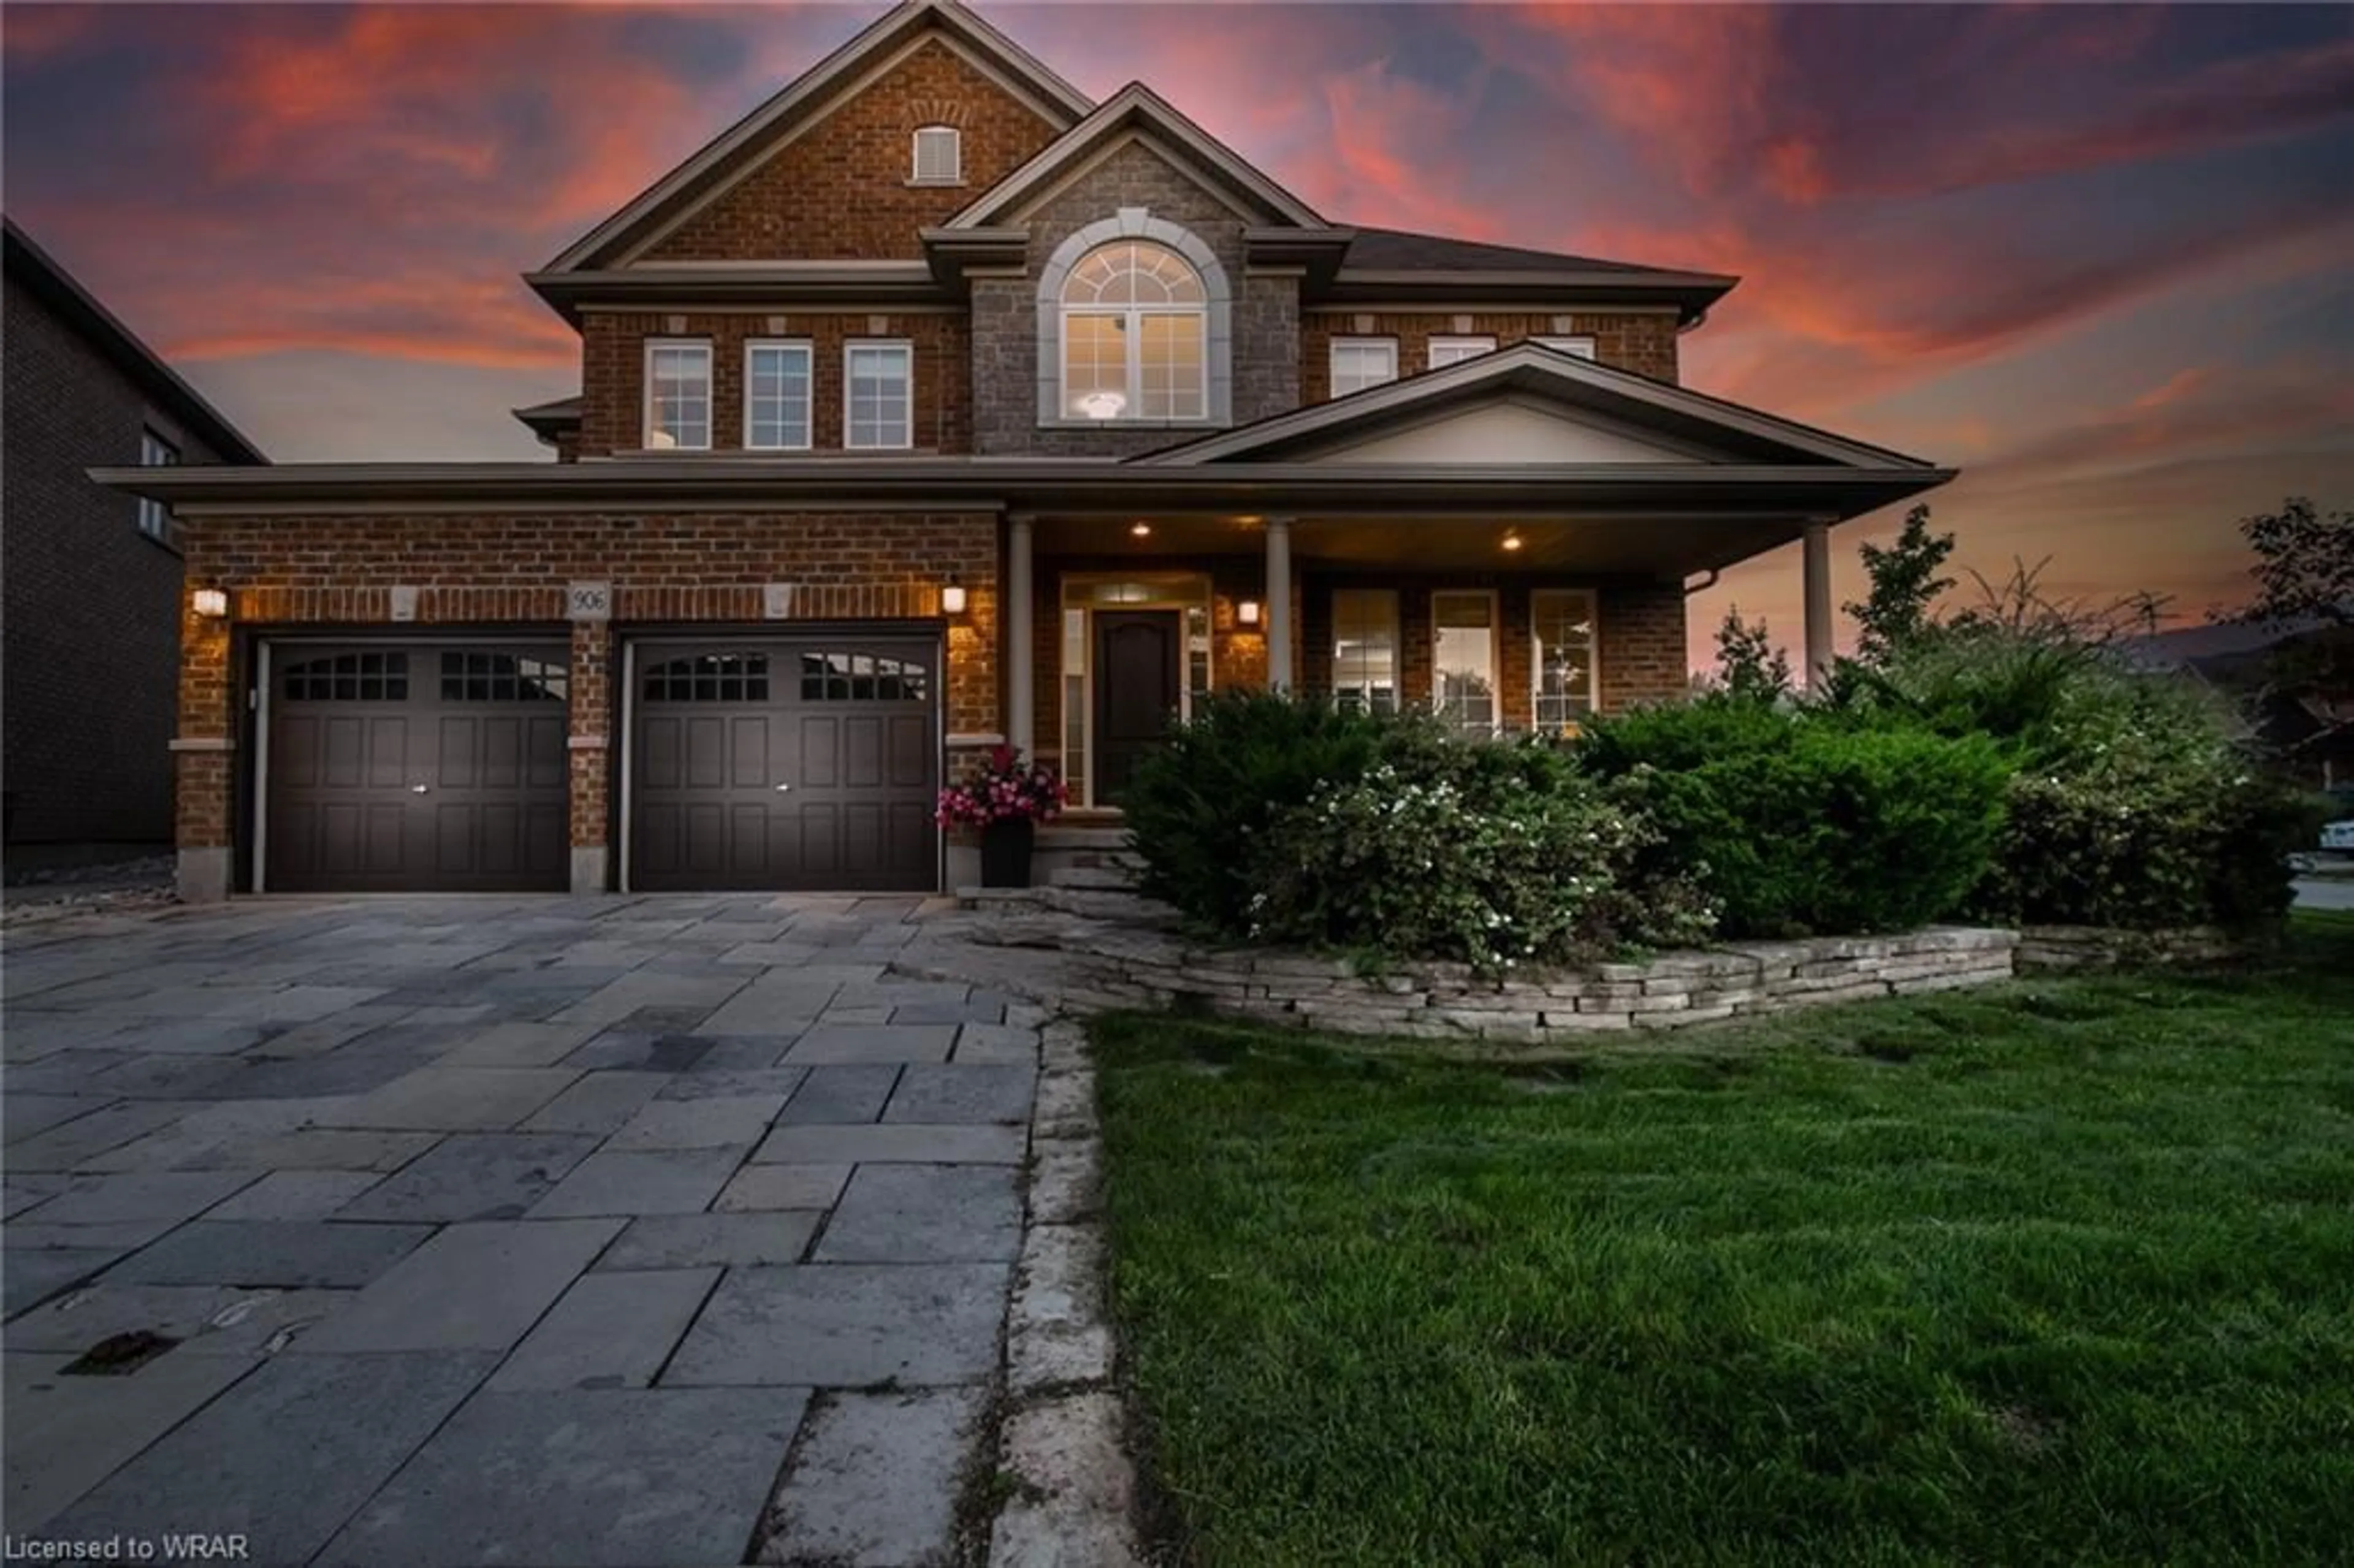 Home with brick exterior material for 906 Fung Pl, Kitchener Ontario N2A 4M3